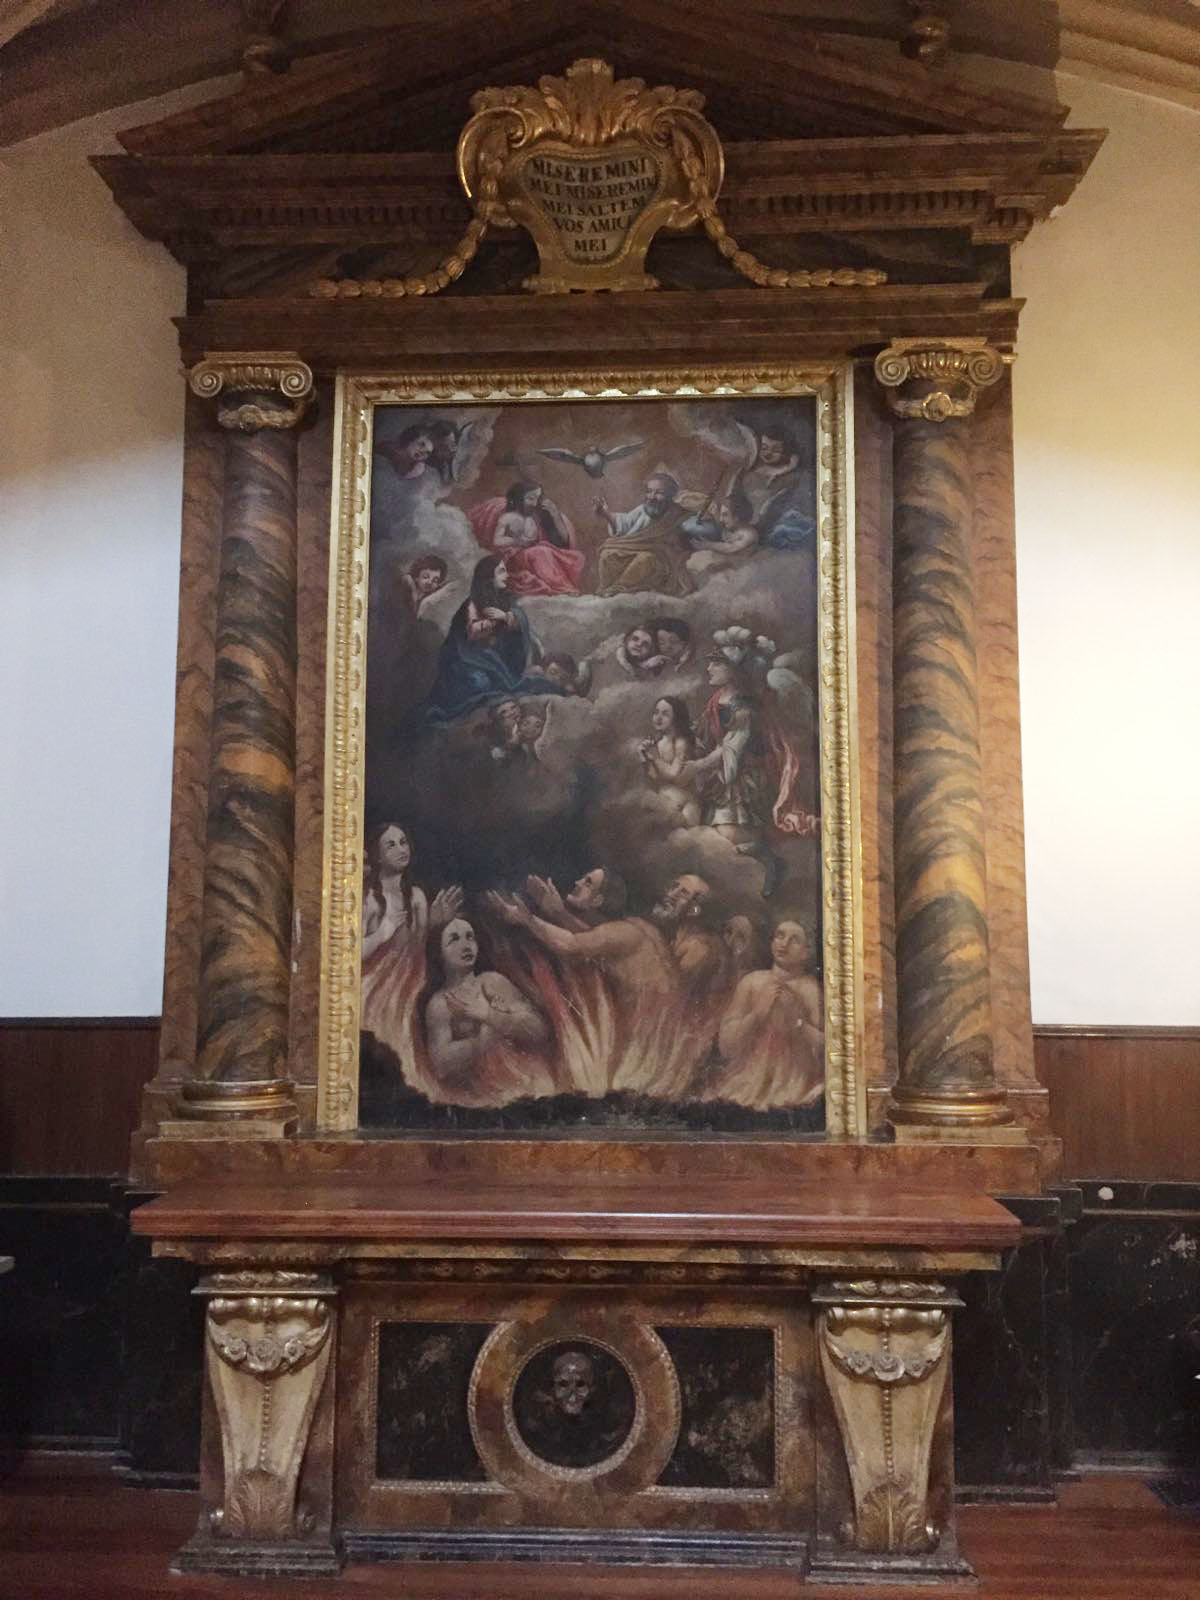 THE PAINTING OF THE SOULS IN PURGATORY IN THE PARISH CHURCH OF SESMA, BY DIEGO DÍAZ DEL VALLE